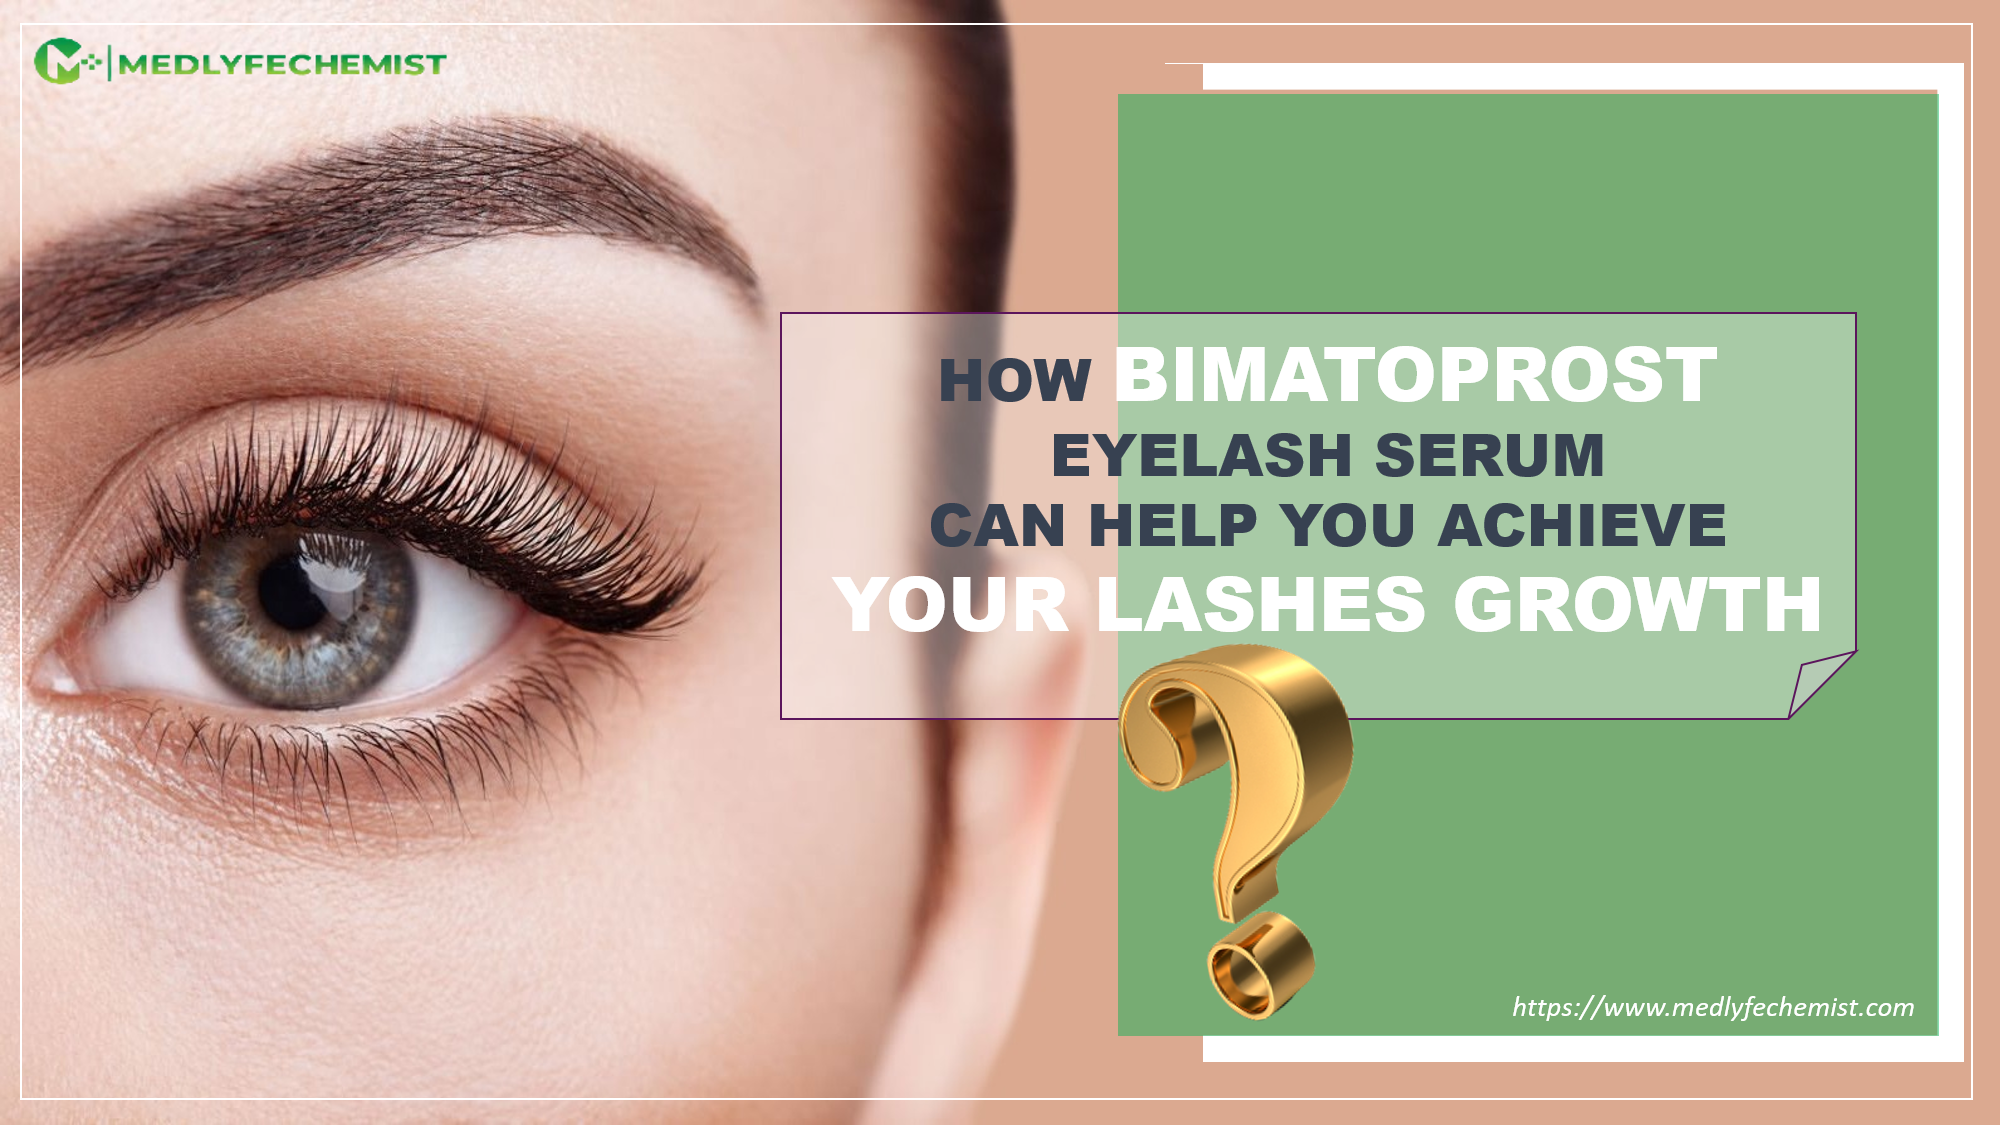 How Can Bimatoprost Eyelash Serum Help You Achieve Your Lashes Growth?